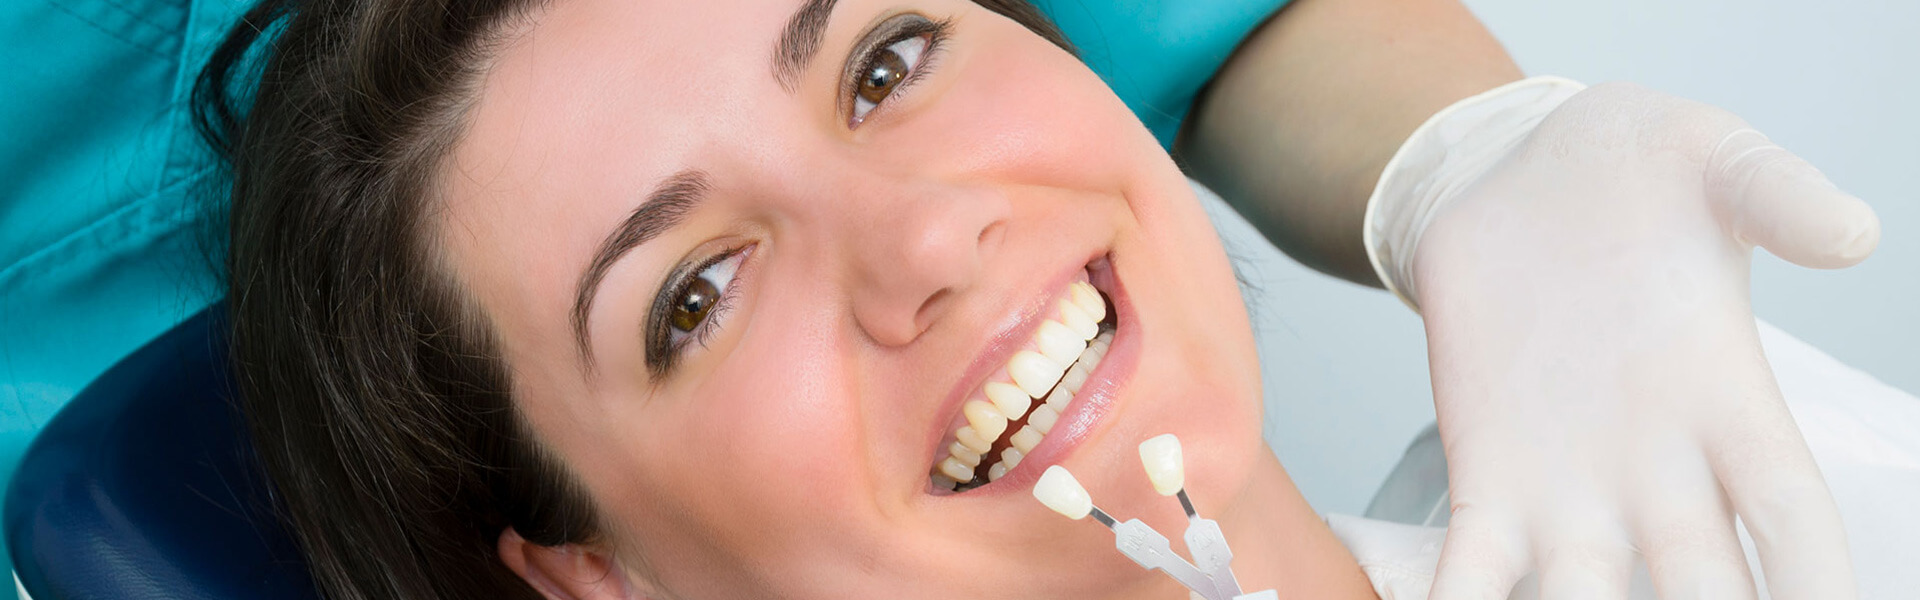 Comparing tooth colored fillings while a female patient is smiling at the camera